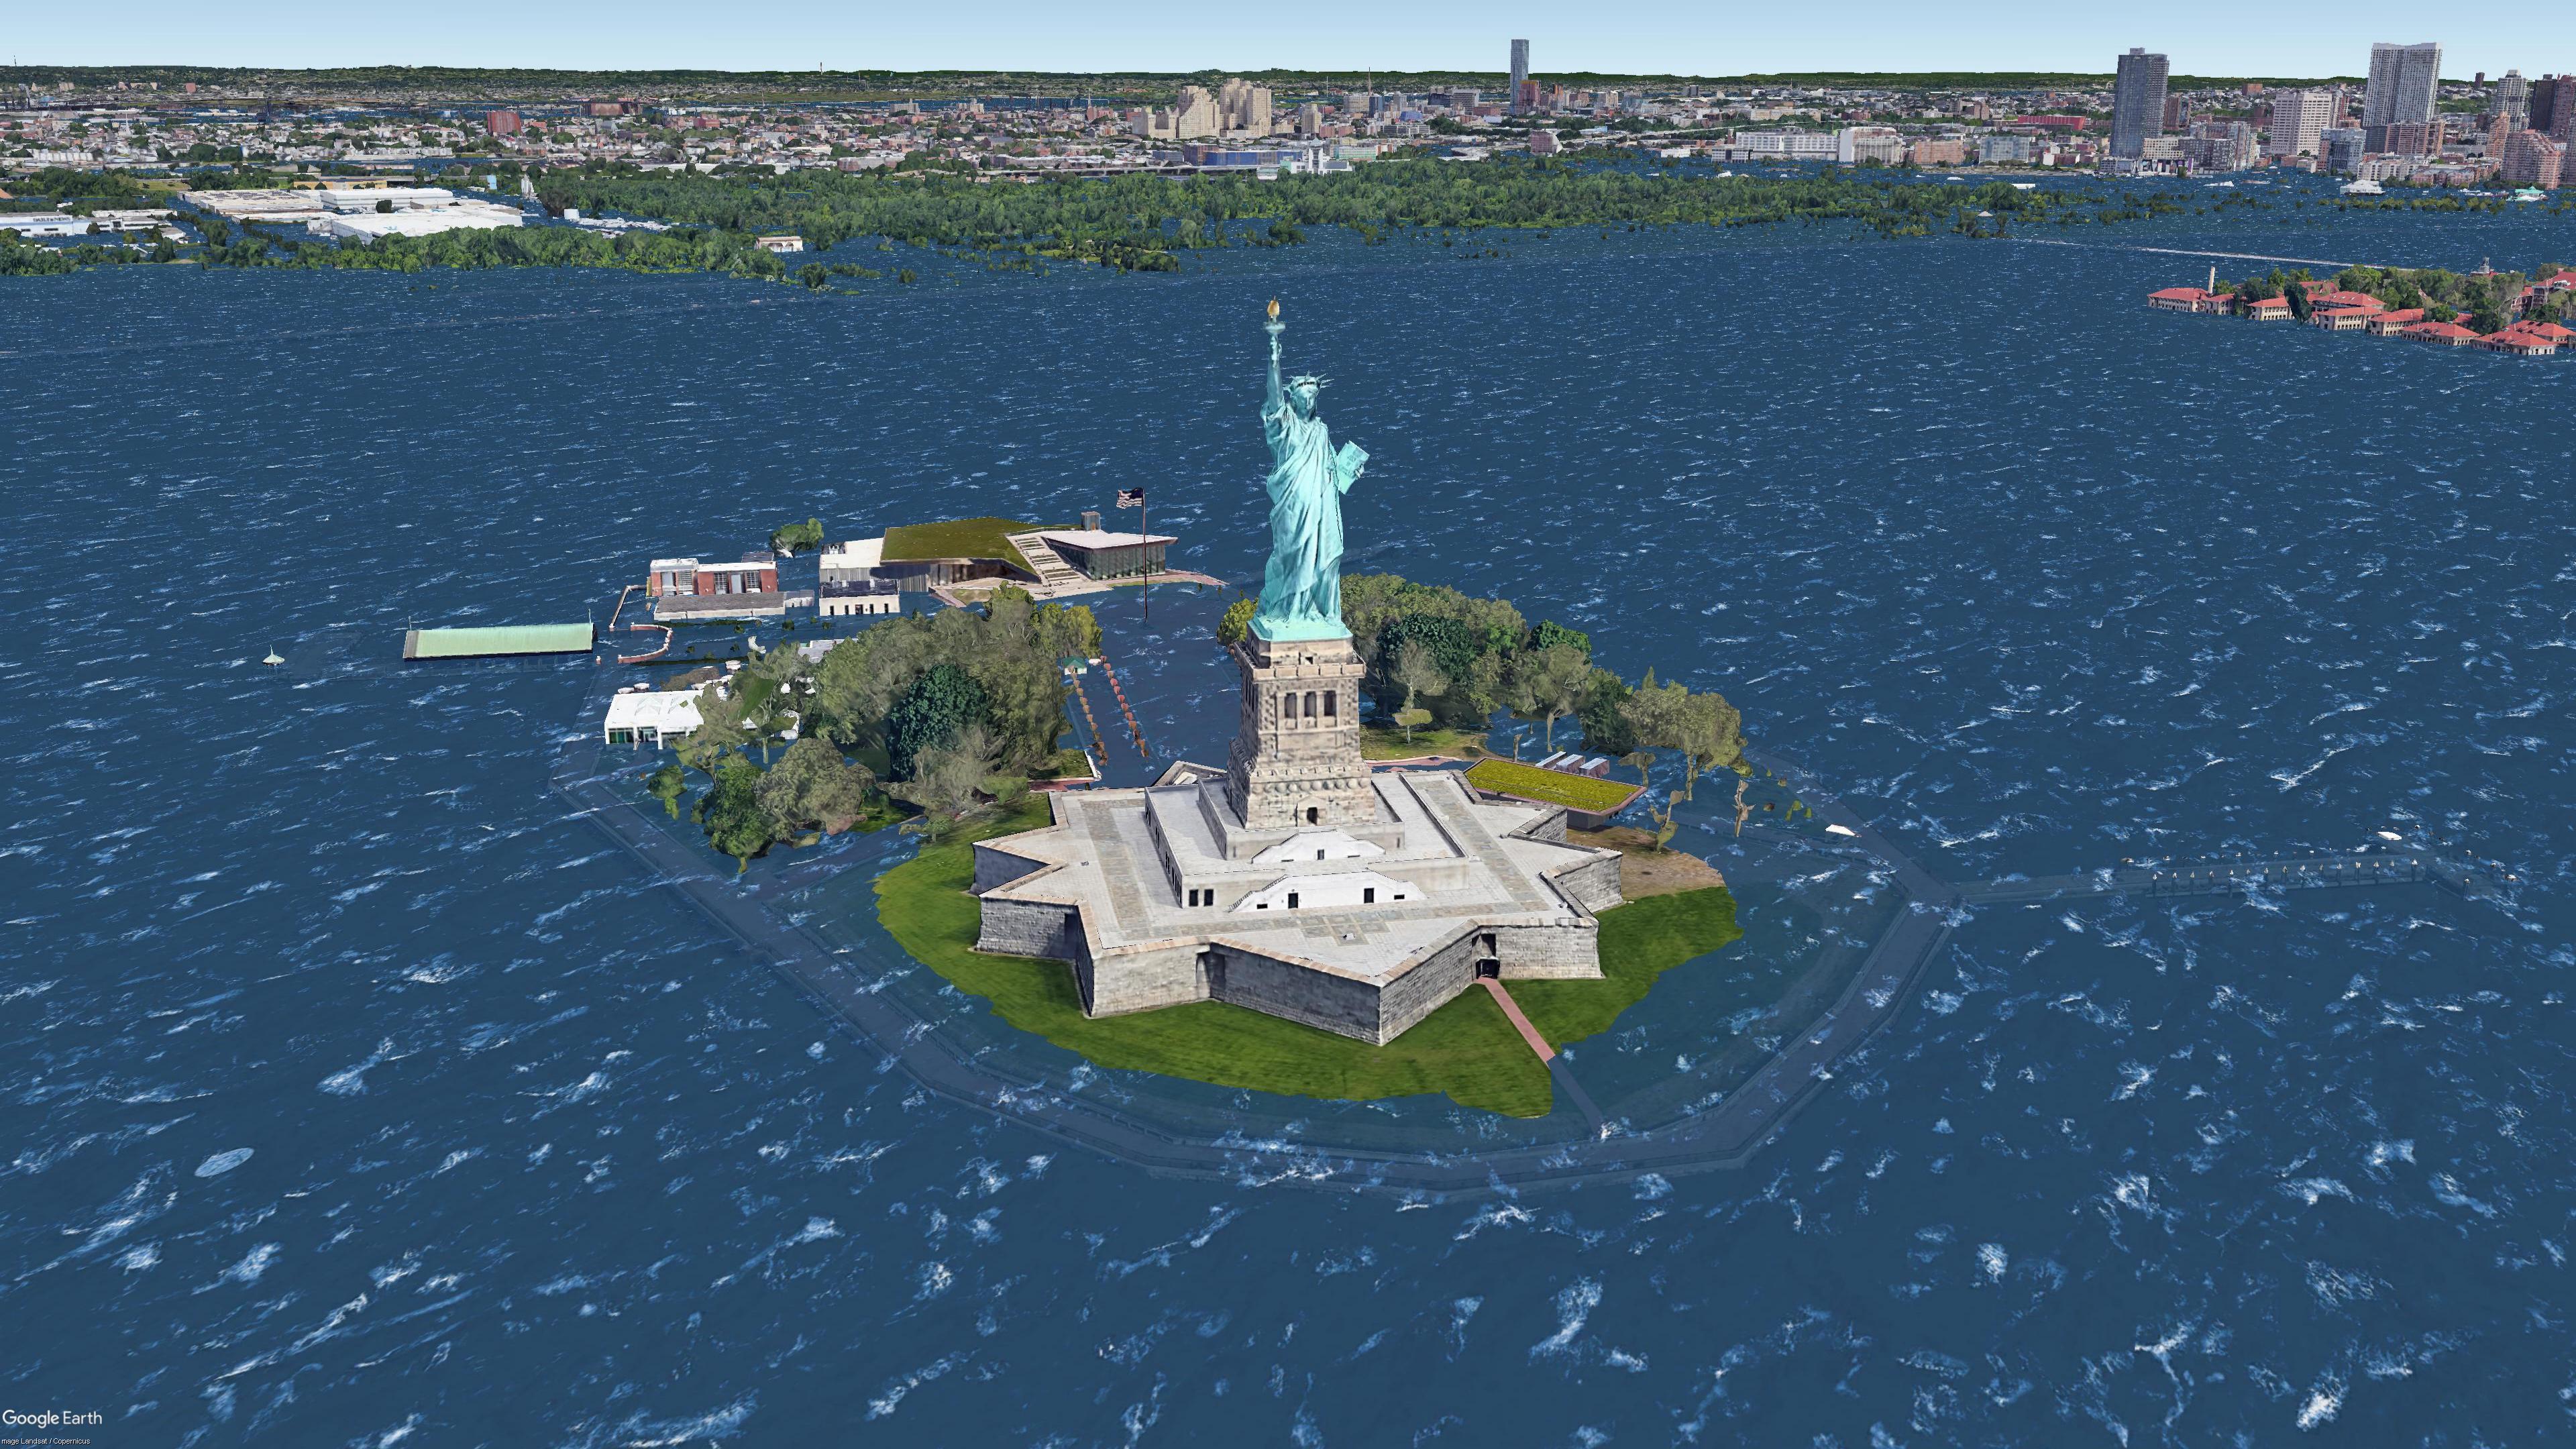 USA__NY__New_York__Statue_Of_Liberty_National_Monument__L13__1p5C.jpg